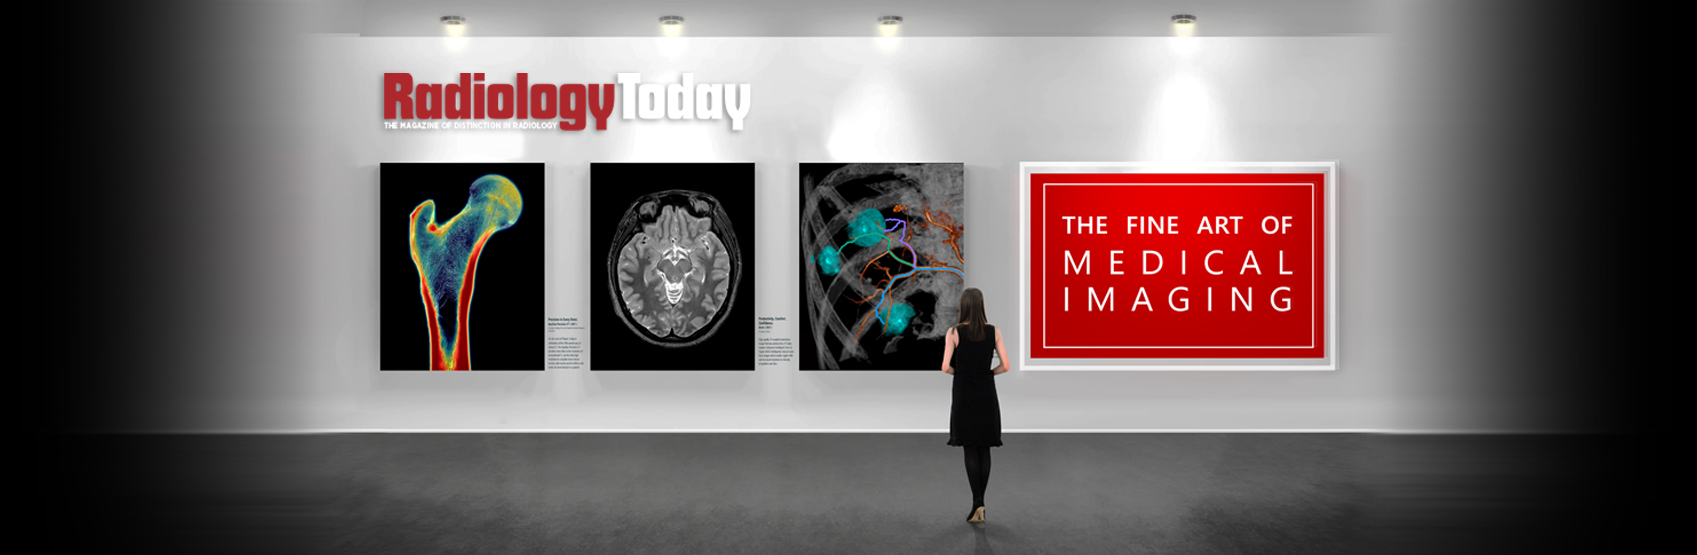 Canon | Outcome Driven Innovations | Made possible. | The Fine Art of Medical Imaging